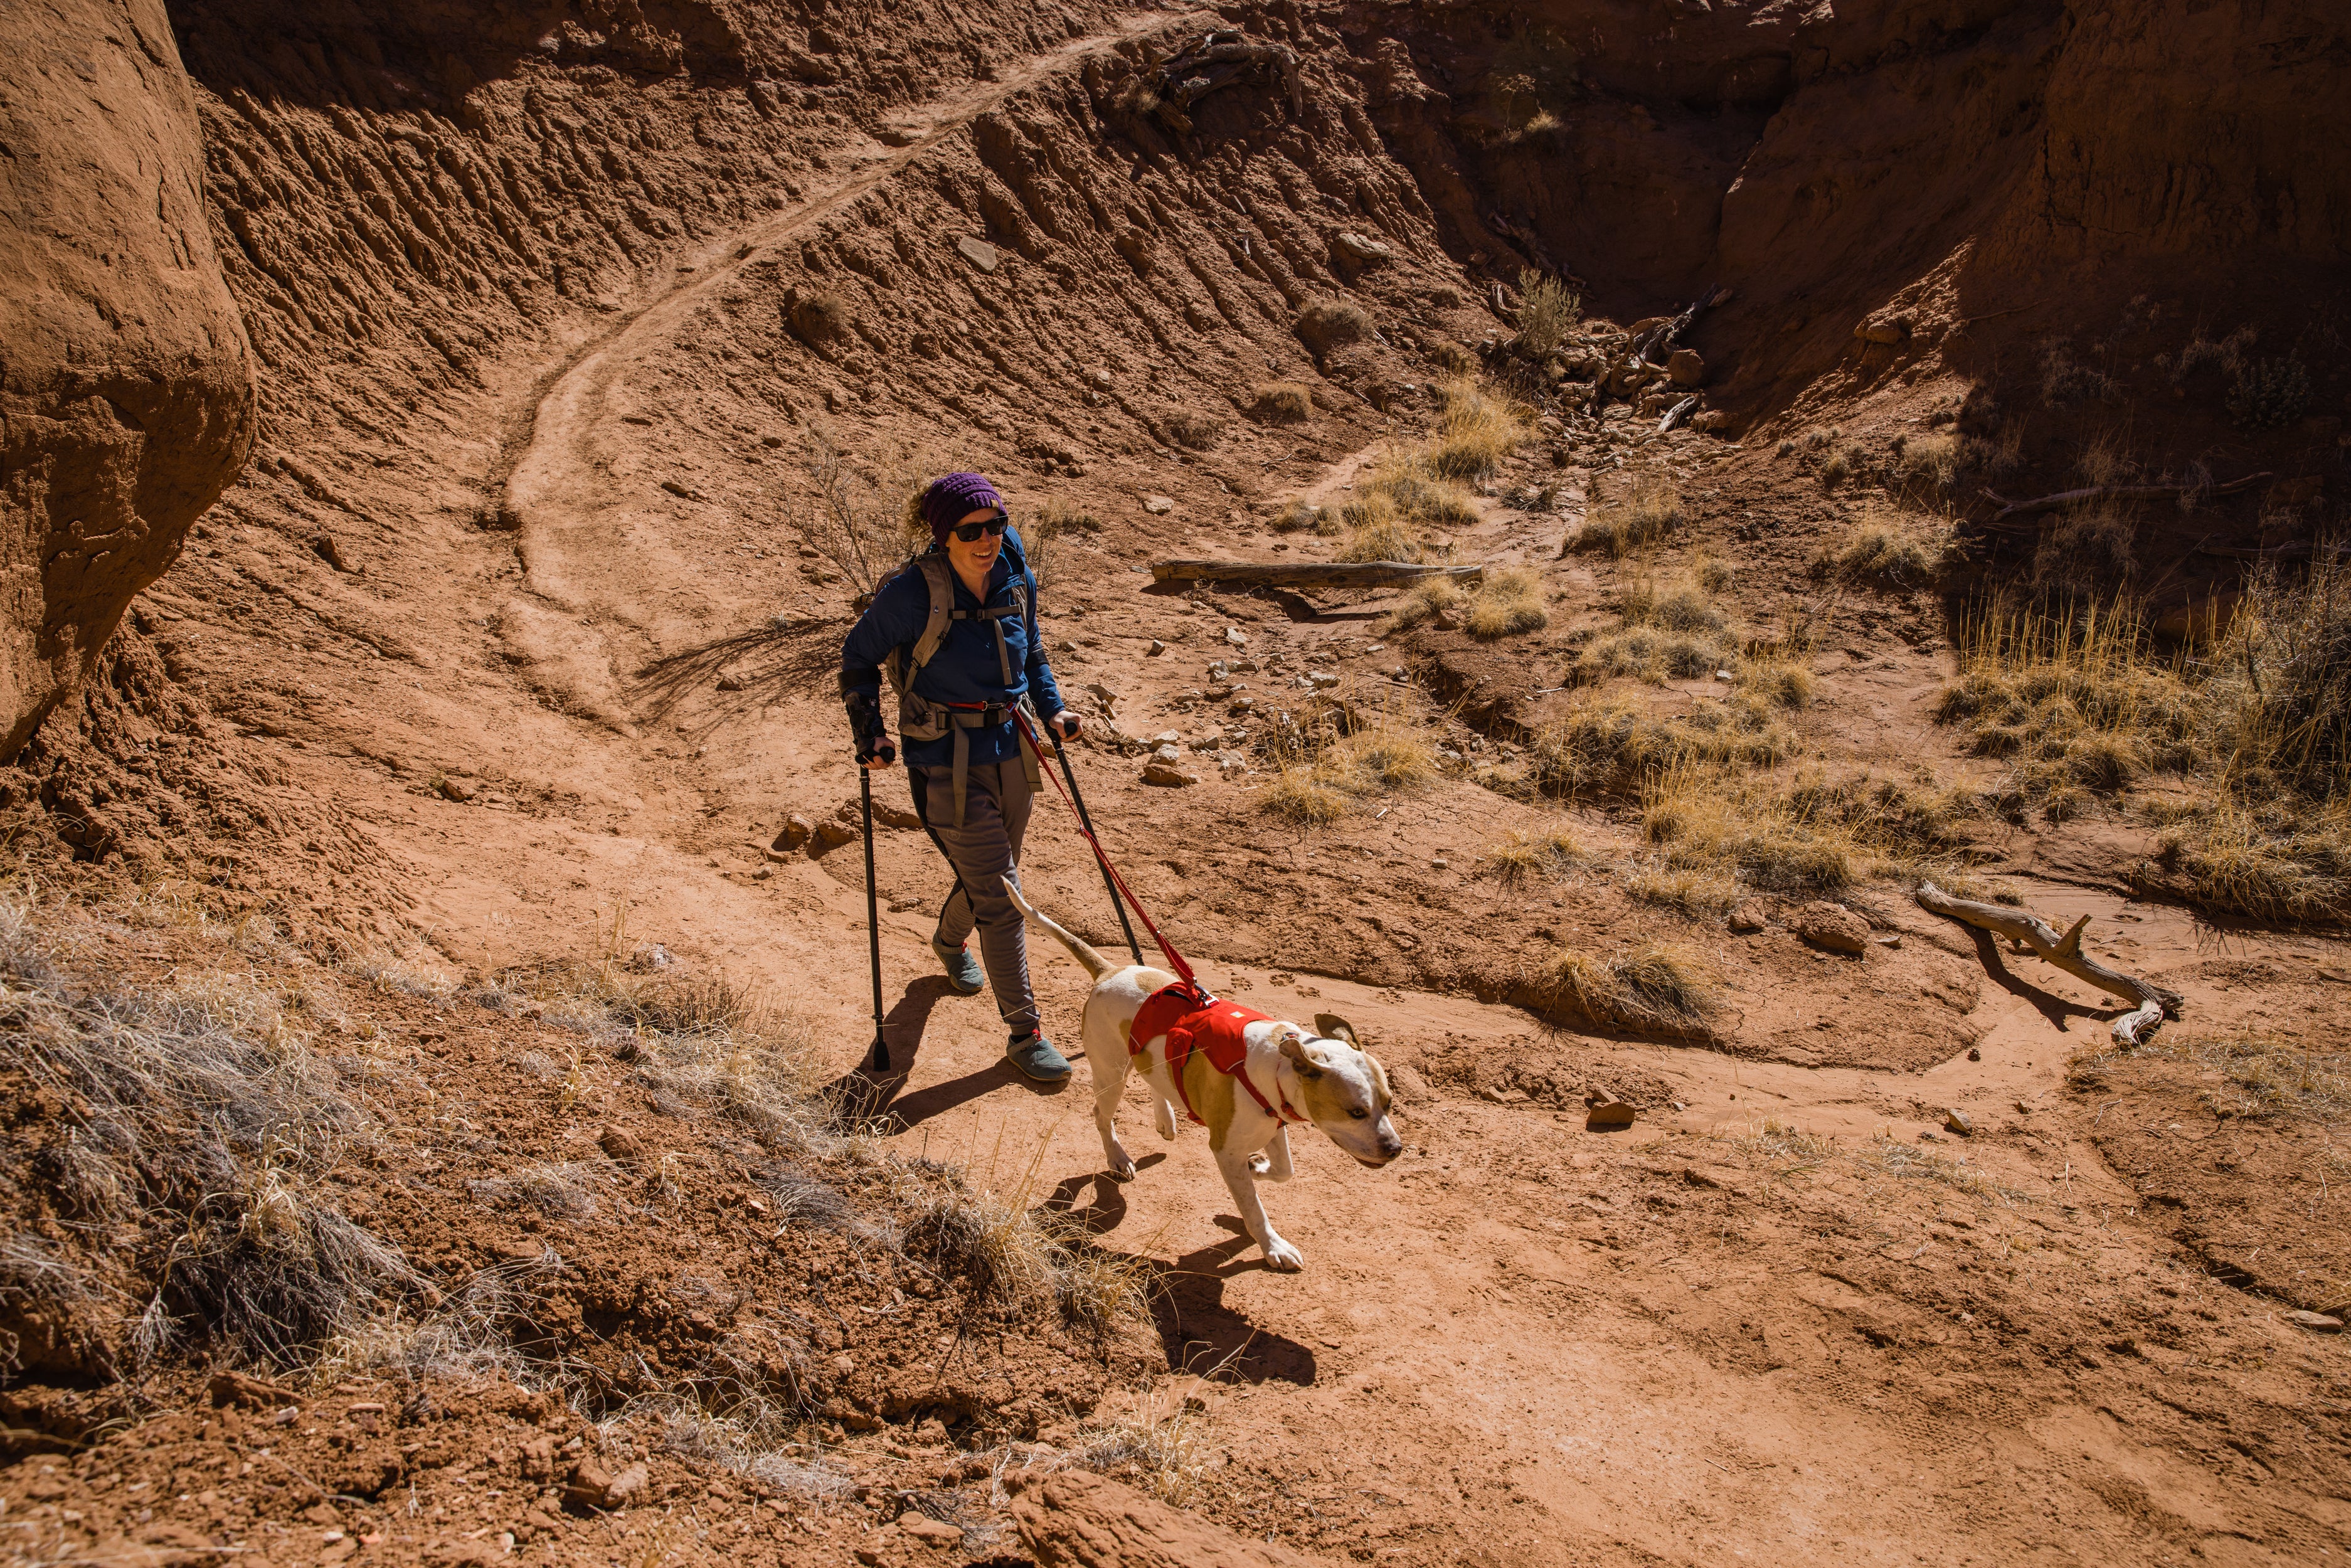 A woman hikes with her dog on a desert trail.